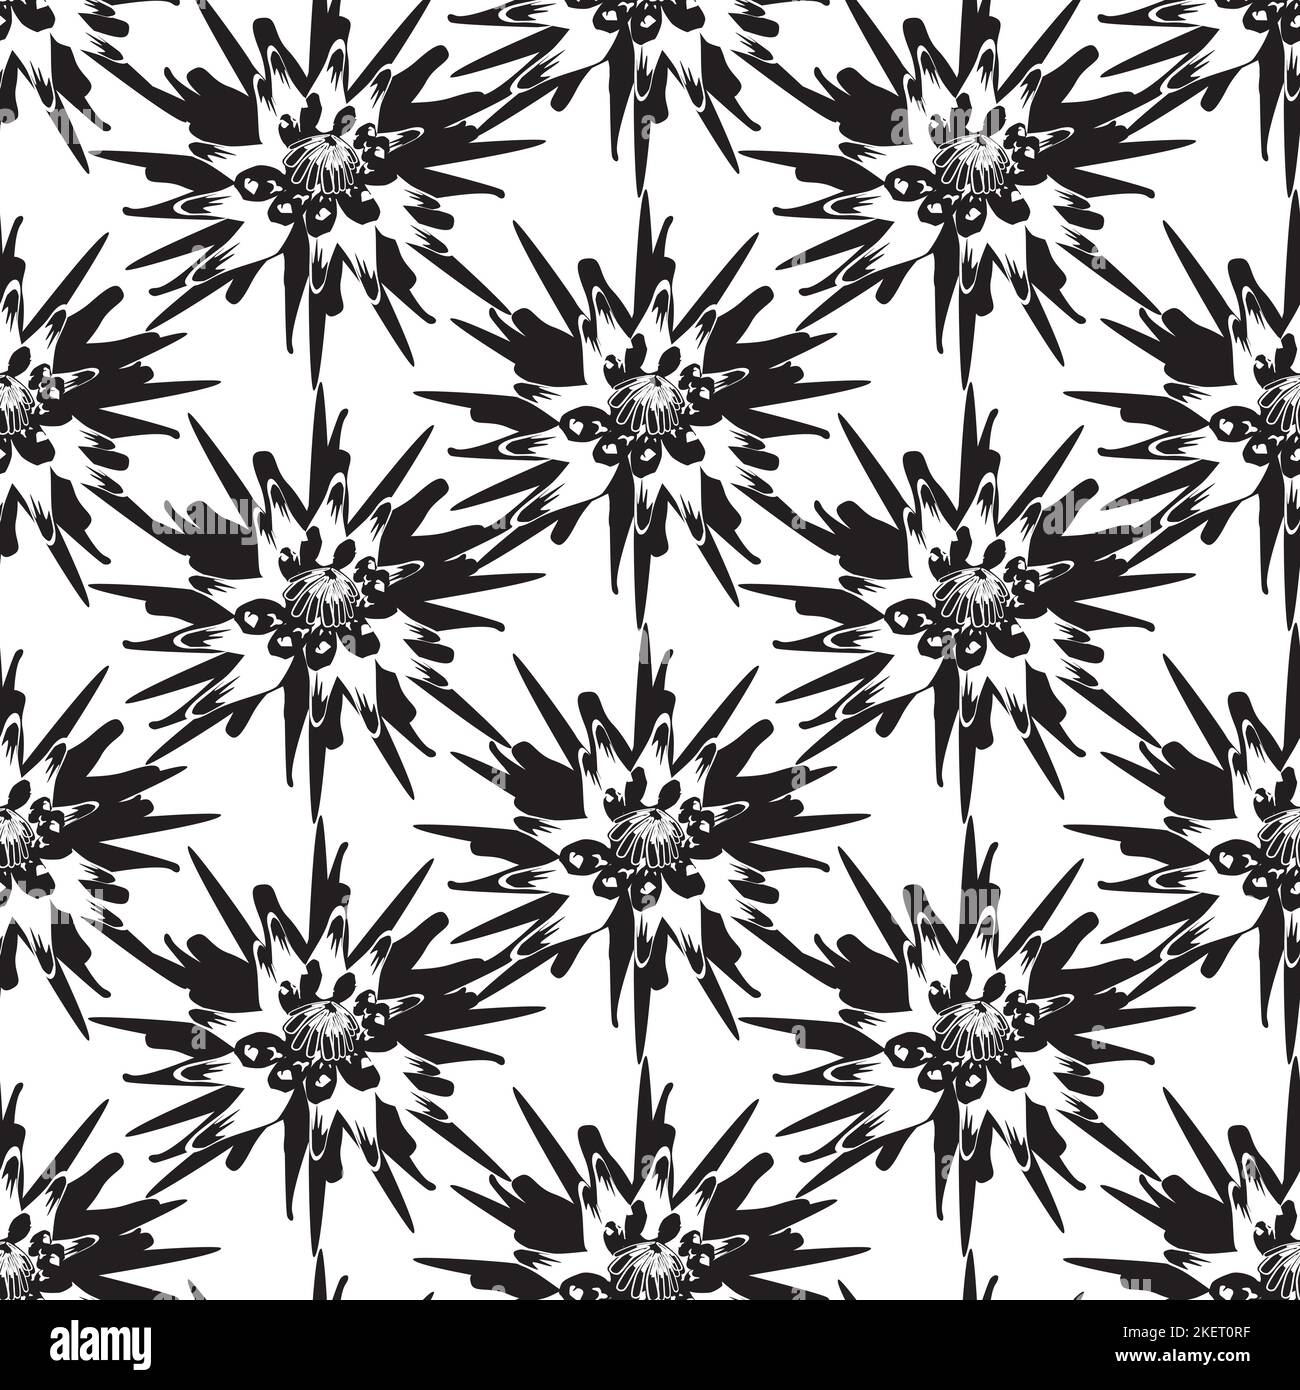 Seamless pattern with chrysanthemum flowers. Black and white floral background. Stock Vector